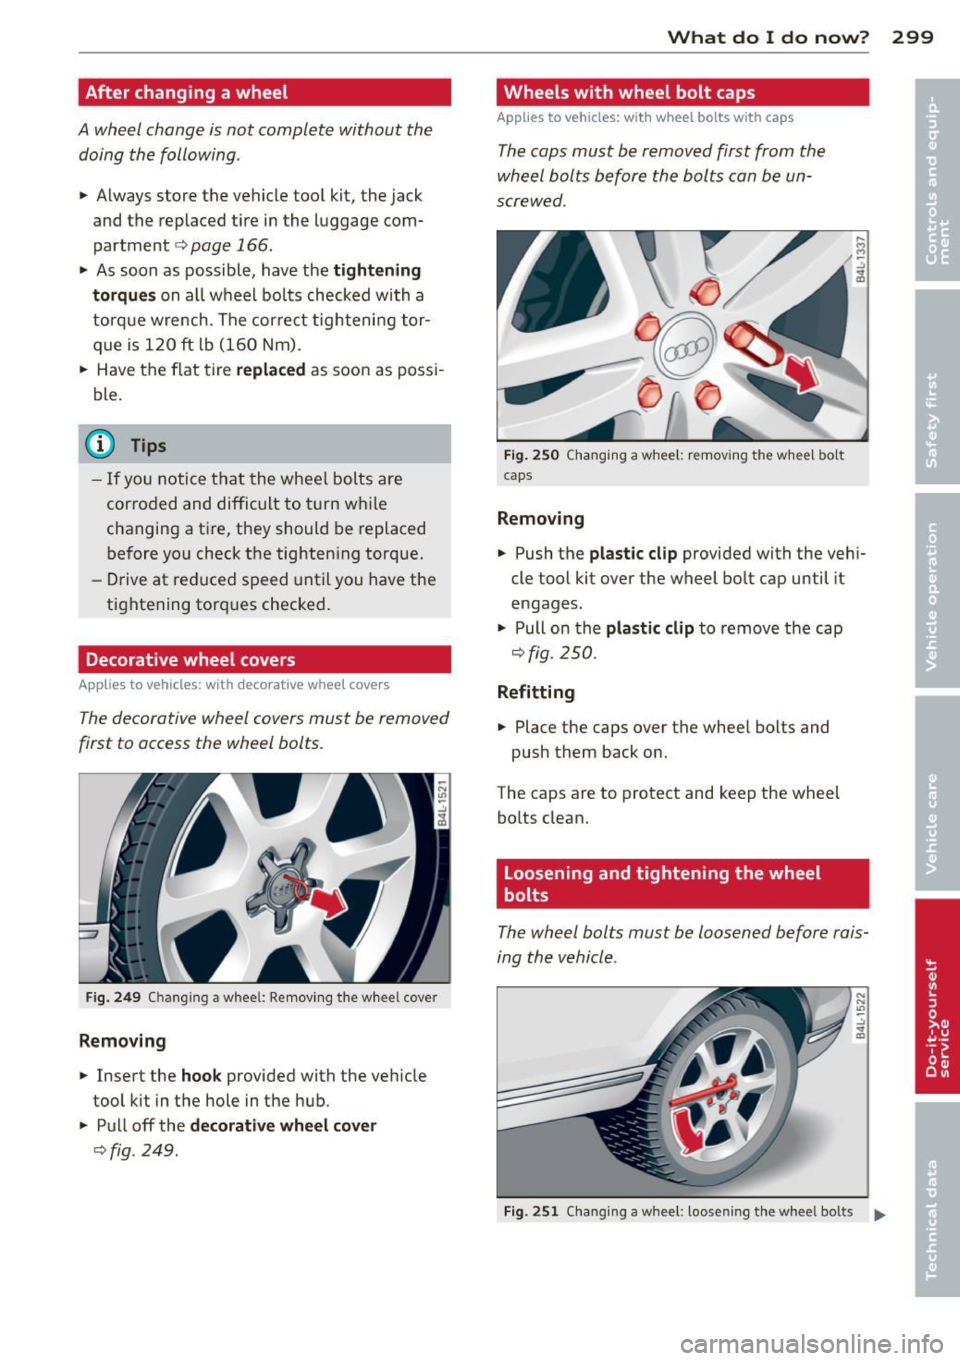 AUDI Q7 2012  Owner´s Manual After  changing  a wheel 
A wheel  change  is not  complete  without  the doing  the  following . 
• Always store  the  vehicle  tool  kit,  the  jack 
and  the  replaced  tire  in the  luggage  com